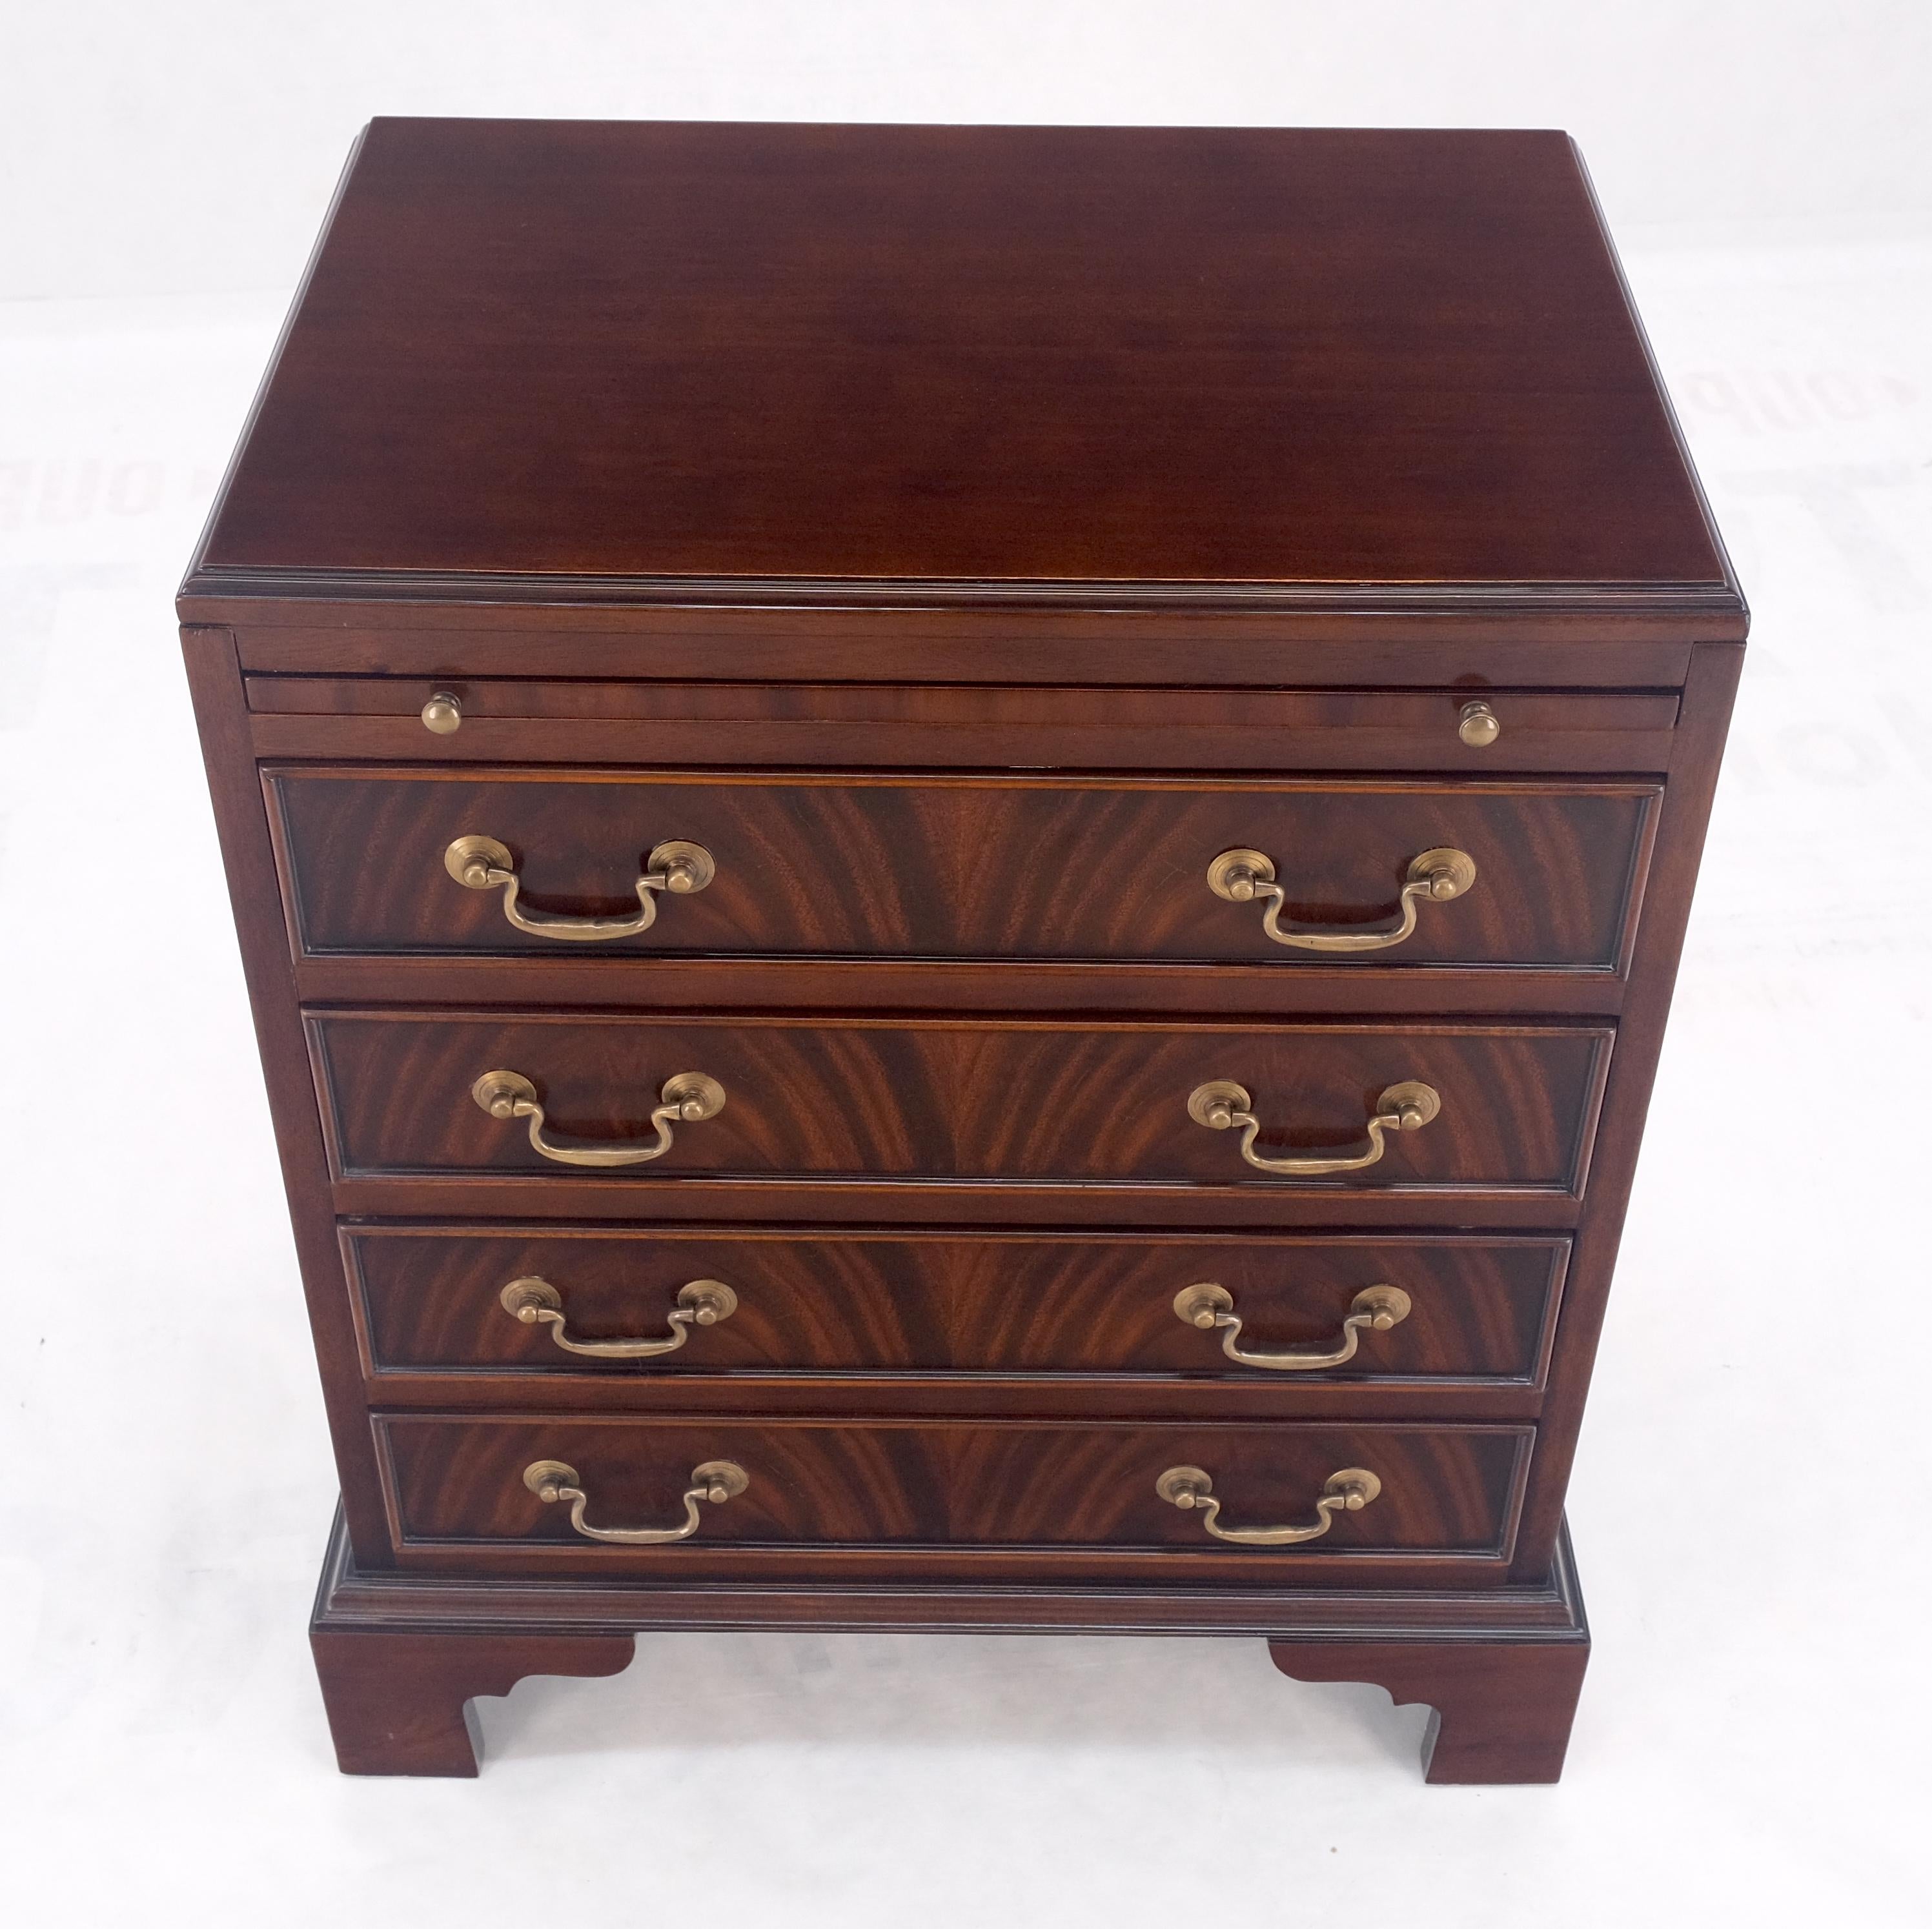 Pull Out Tray 4 Schubladen Flamme Mahagoni Messing Pull Compact Bachelor Chest Dresser (amerikanisch) im Angebot